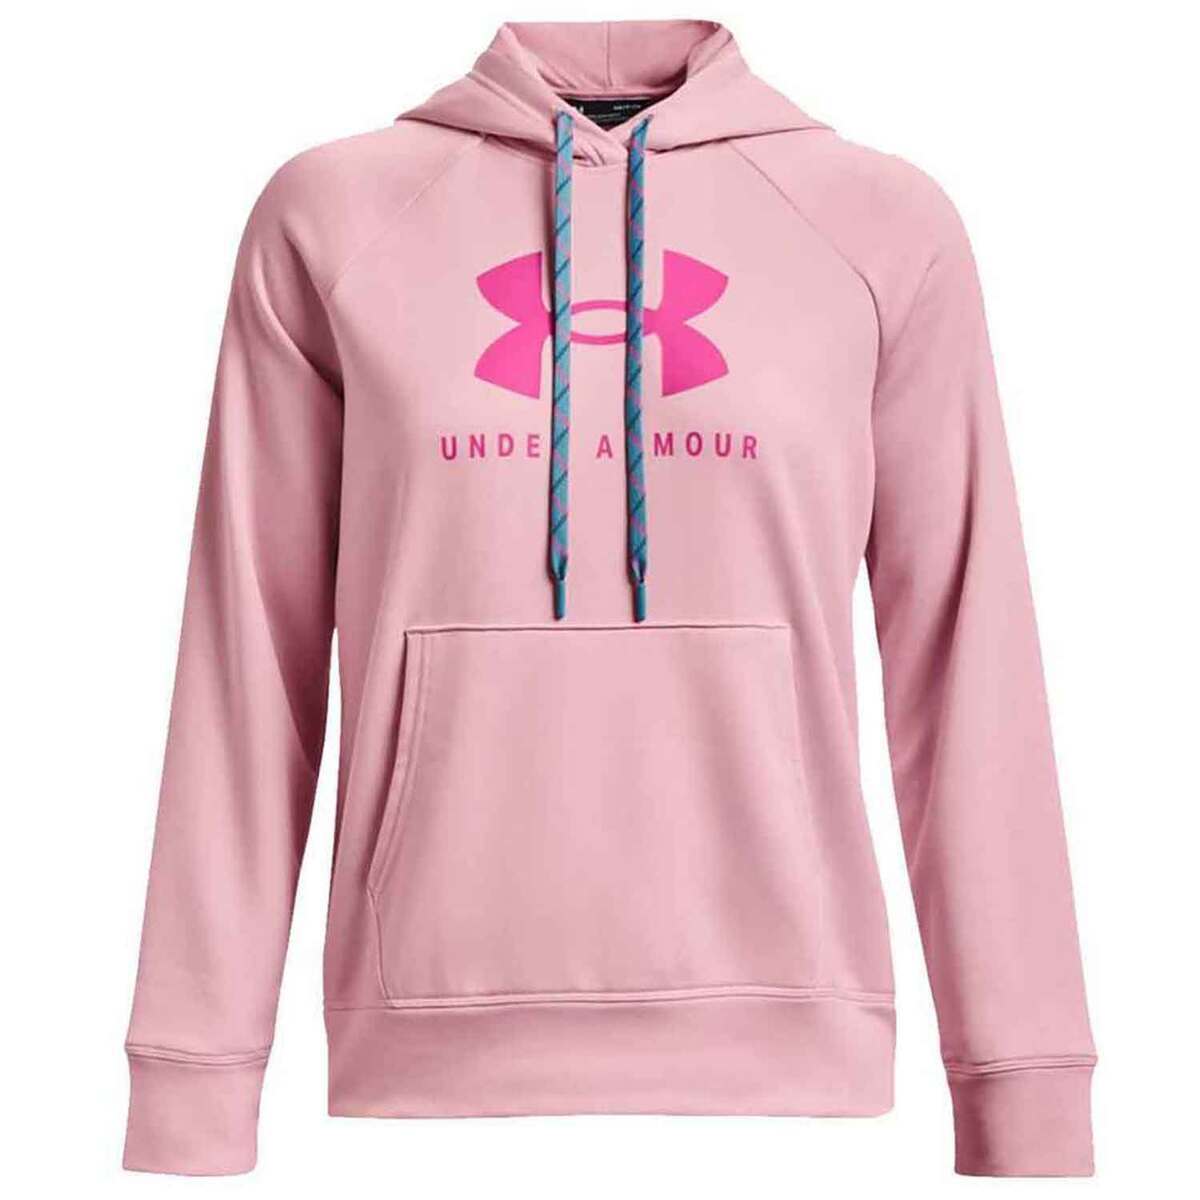 Under Armour Storm Women's Gray Pink Pullover Hoodie Fleece Lined Style  1260127